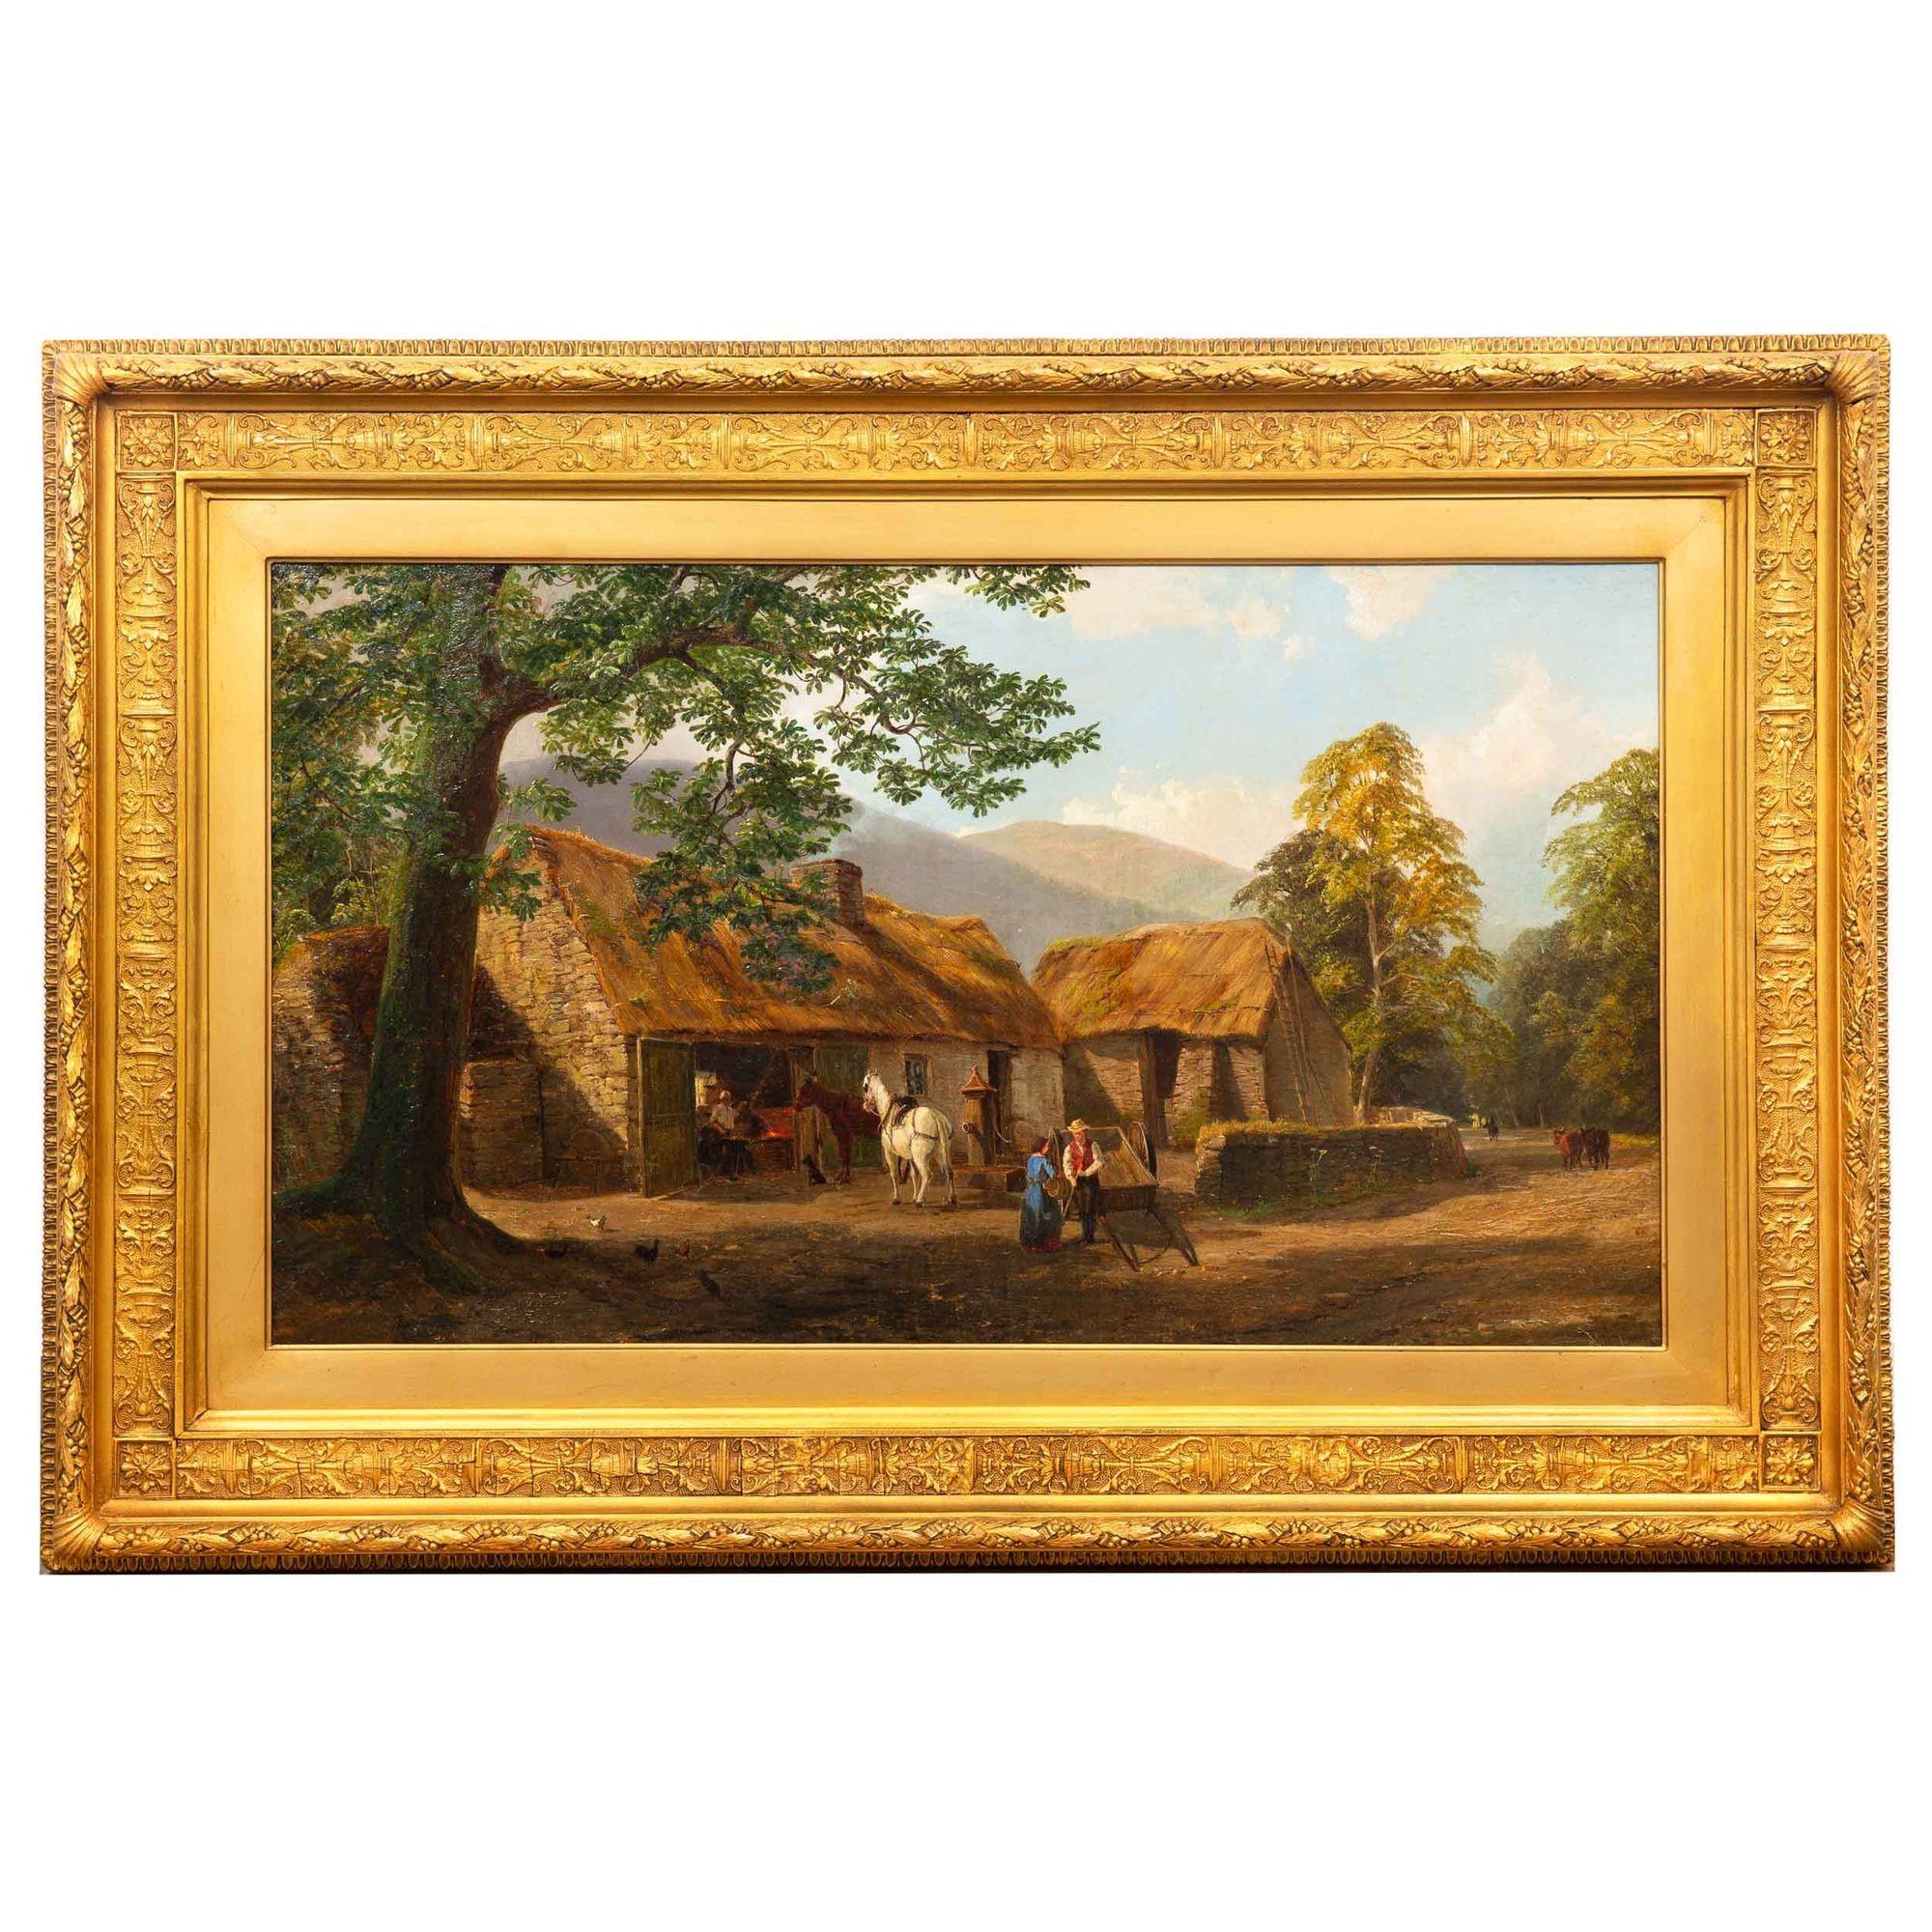 Romantic Authentic Oil Painting by John Faulkner, R.H.A. of Blacksmith “The Smeltery